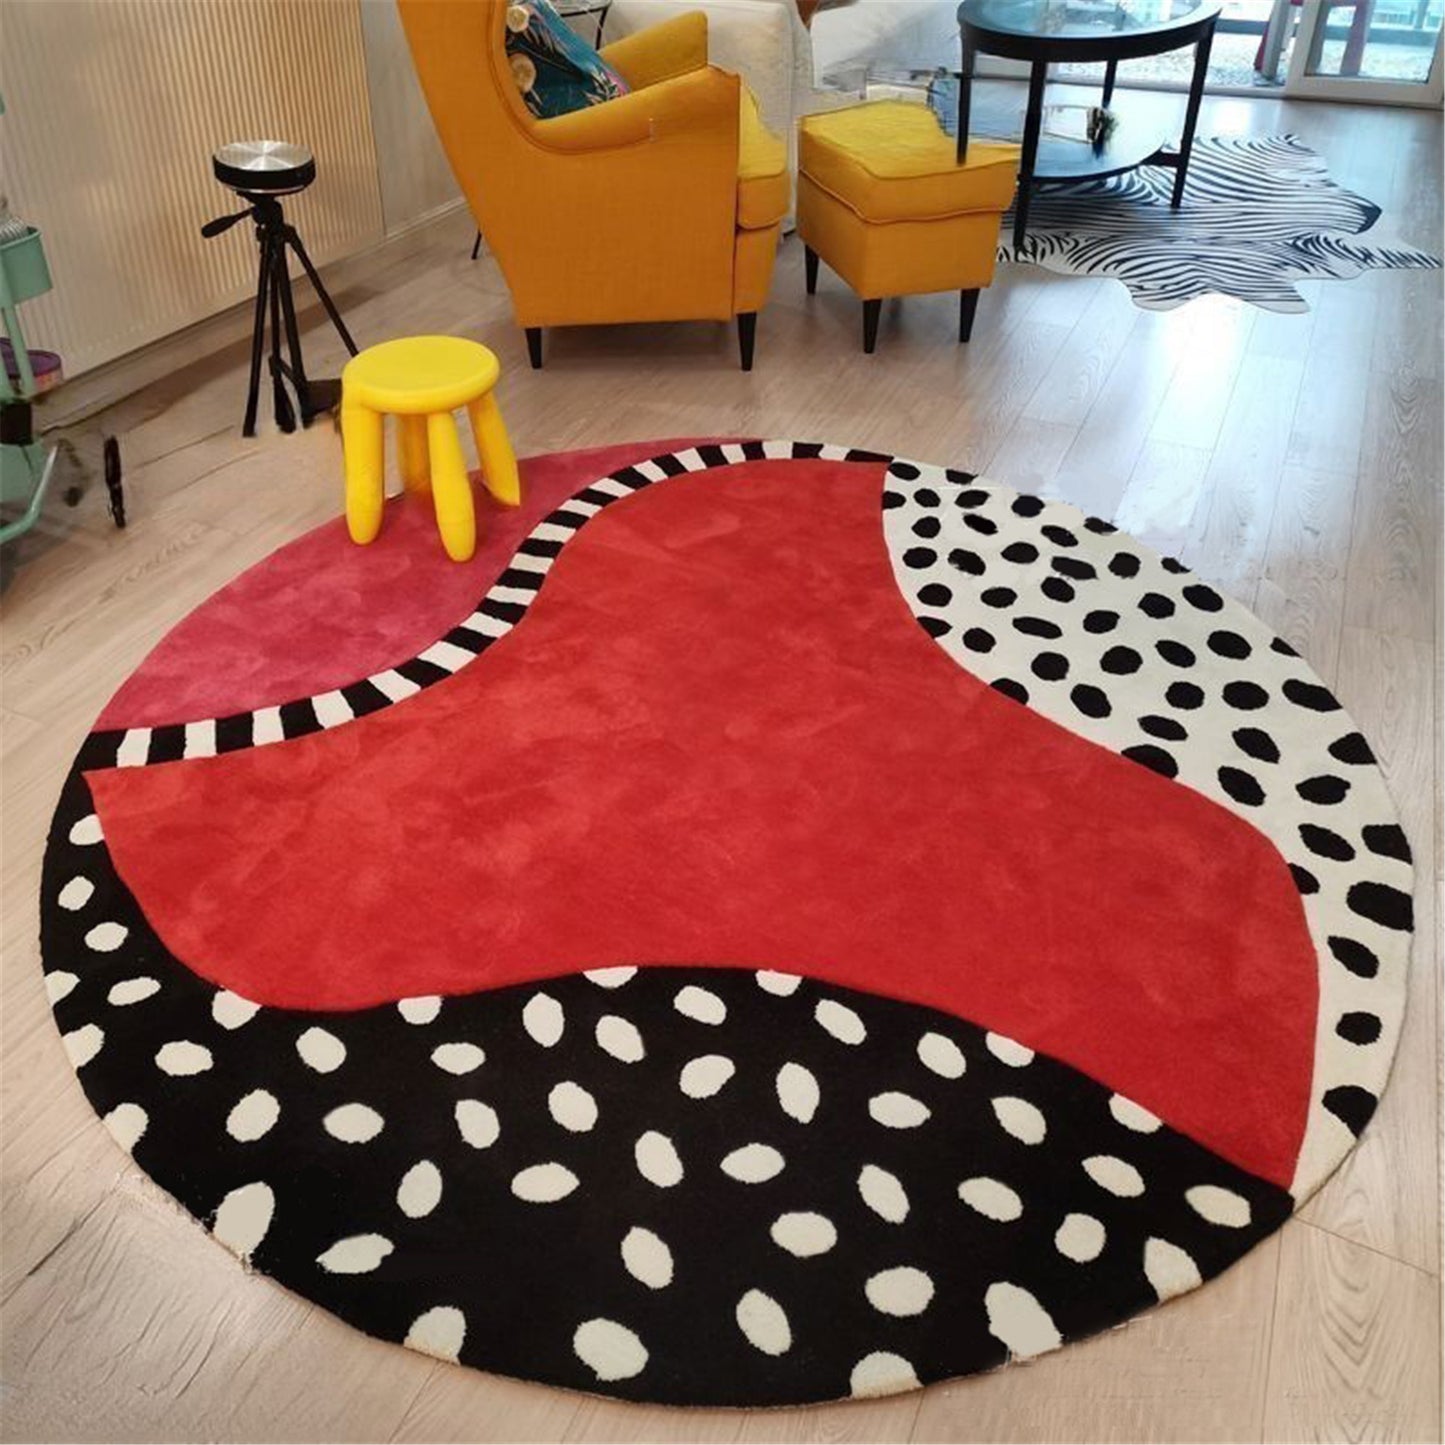 Hand Tufted Round Area Rug,Thick Floor Rug Carpets,Living Room Decor